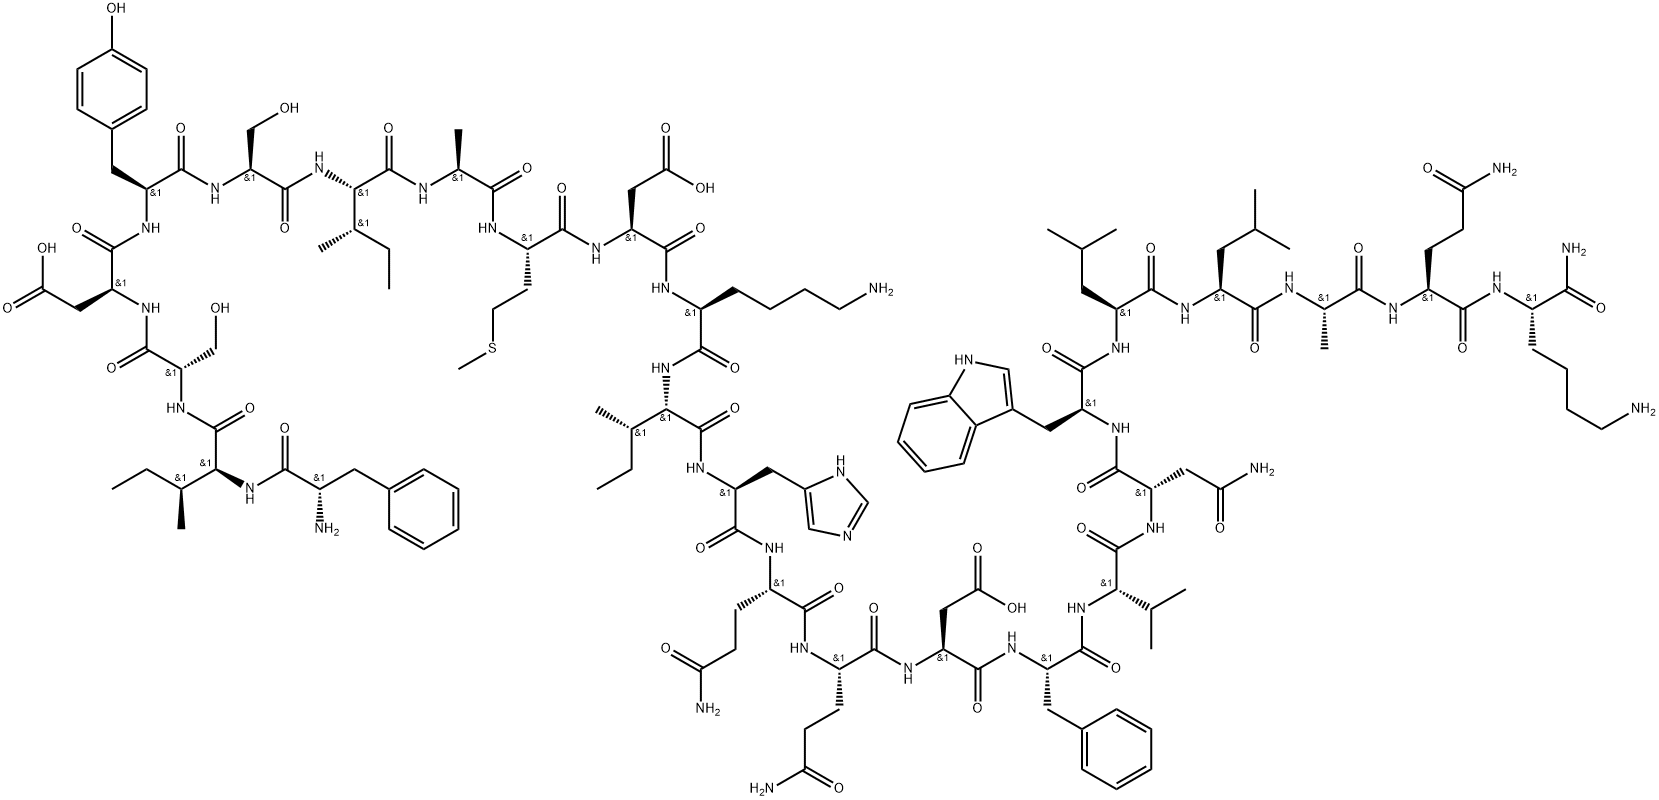 GASTRIC INHIBITORY POLYPEPTIDE (6-30) AMIDE (HUMAN) Structure